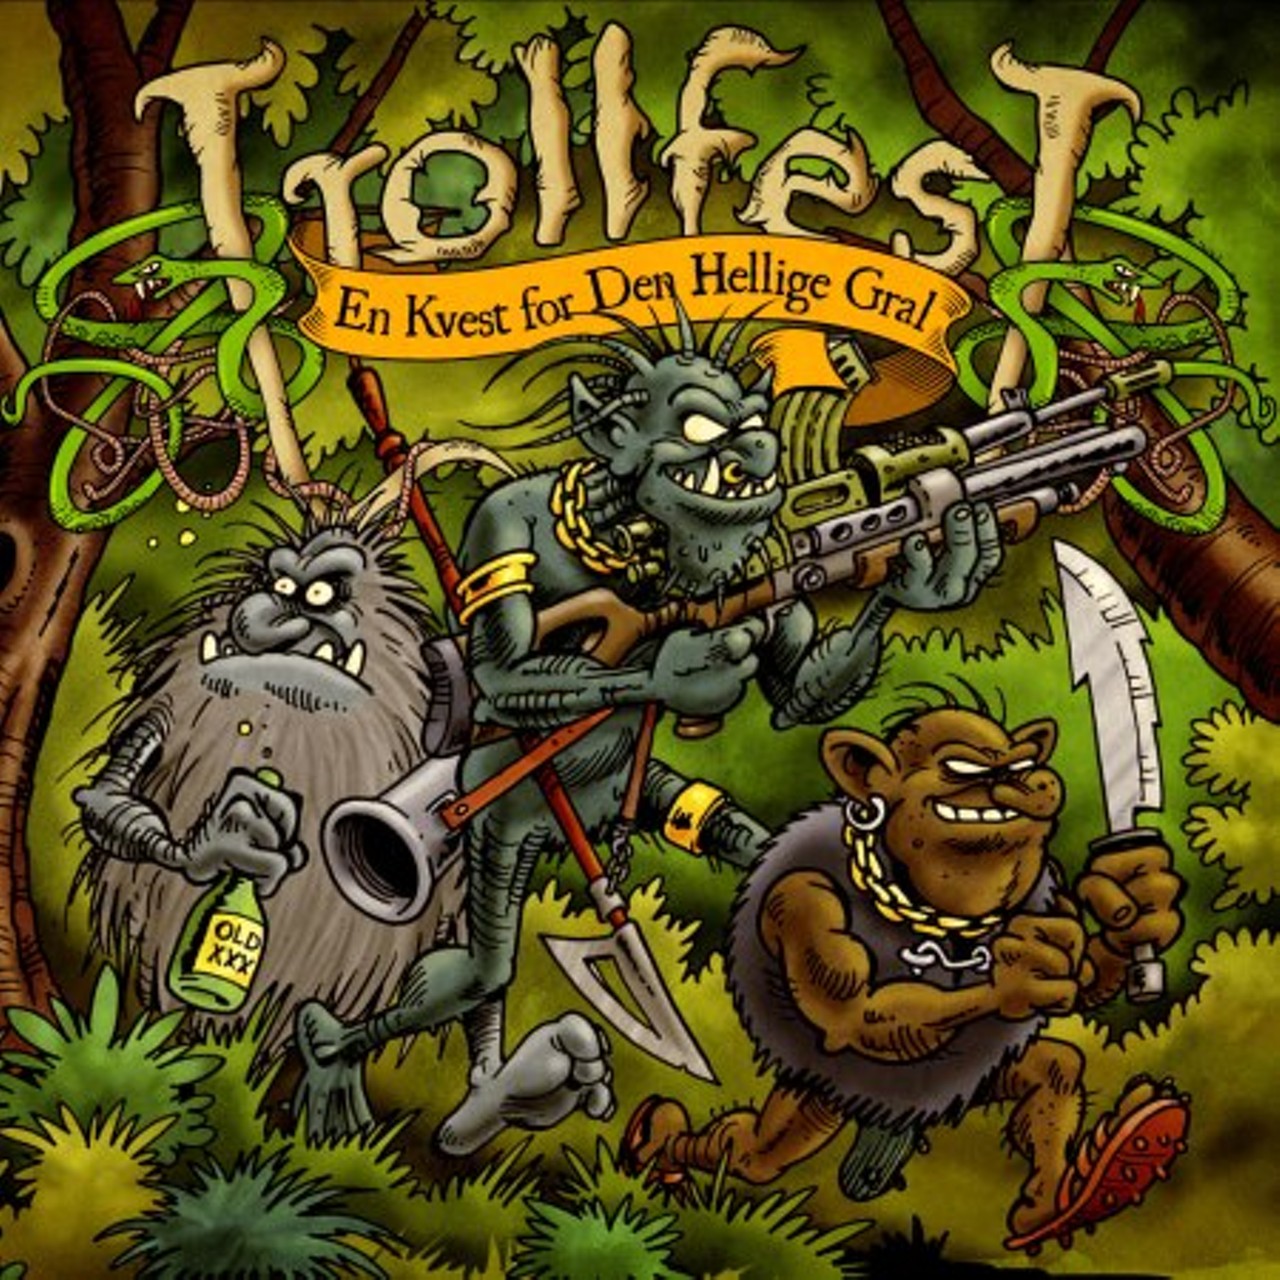 Trollfest
11/23 @ the Token Lounge, Westland 
Hard drinking folk metallers from Norway (hence the troll theme). On a bill with Alestorm, this should be quite a night.